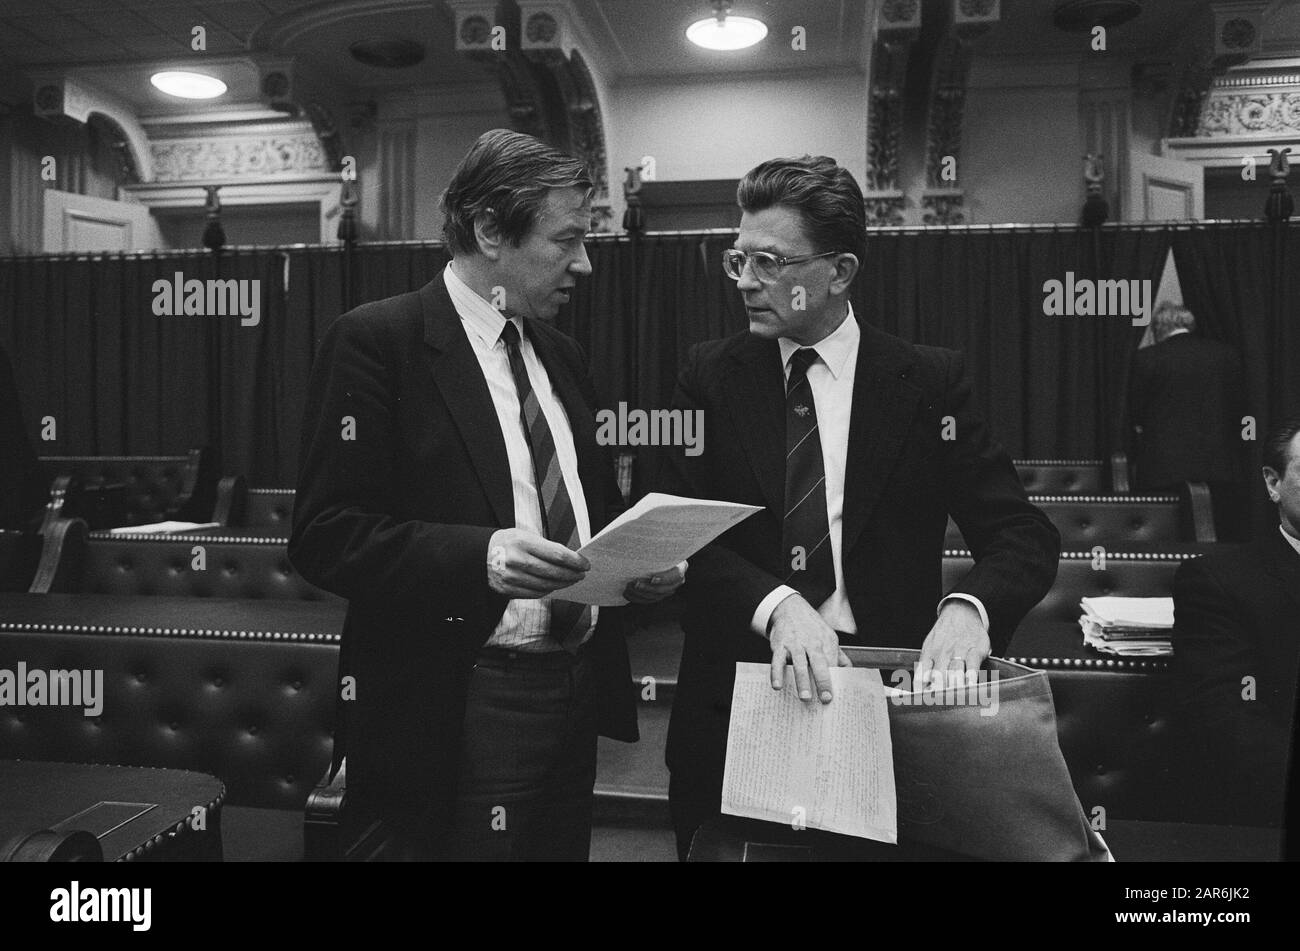 Minister Van Aardenne makes a statement in the House of Representatives following report RSV-enquete Van Dam (l) and Van Dijk, nr. 5a and 6a Joekes (l) and Van Dam Date: 18 December 1984 Keywords: REPORT, politics, statements Personal name: Joekes Institution name: RSV Stock Photo